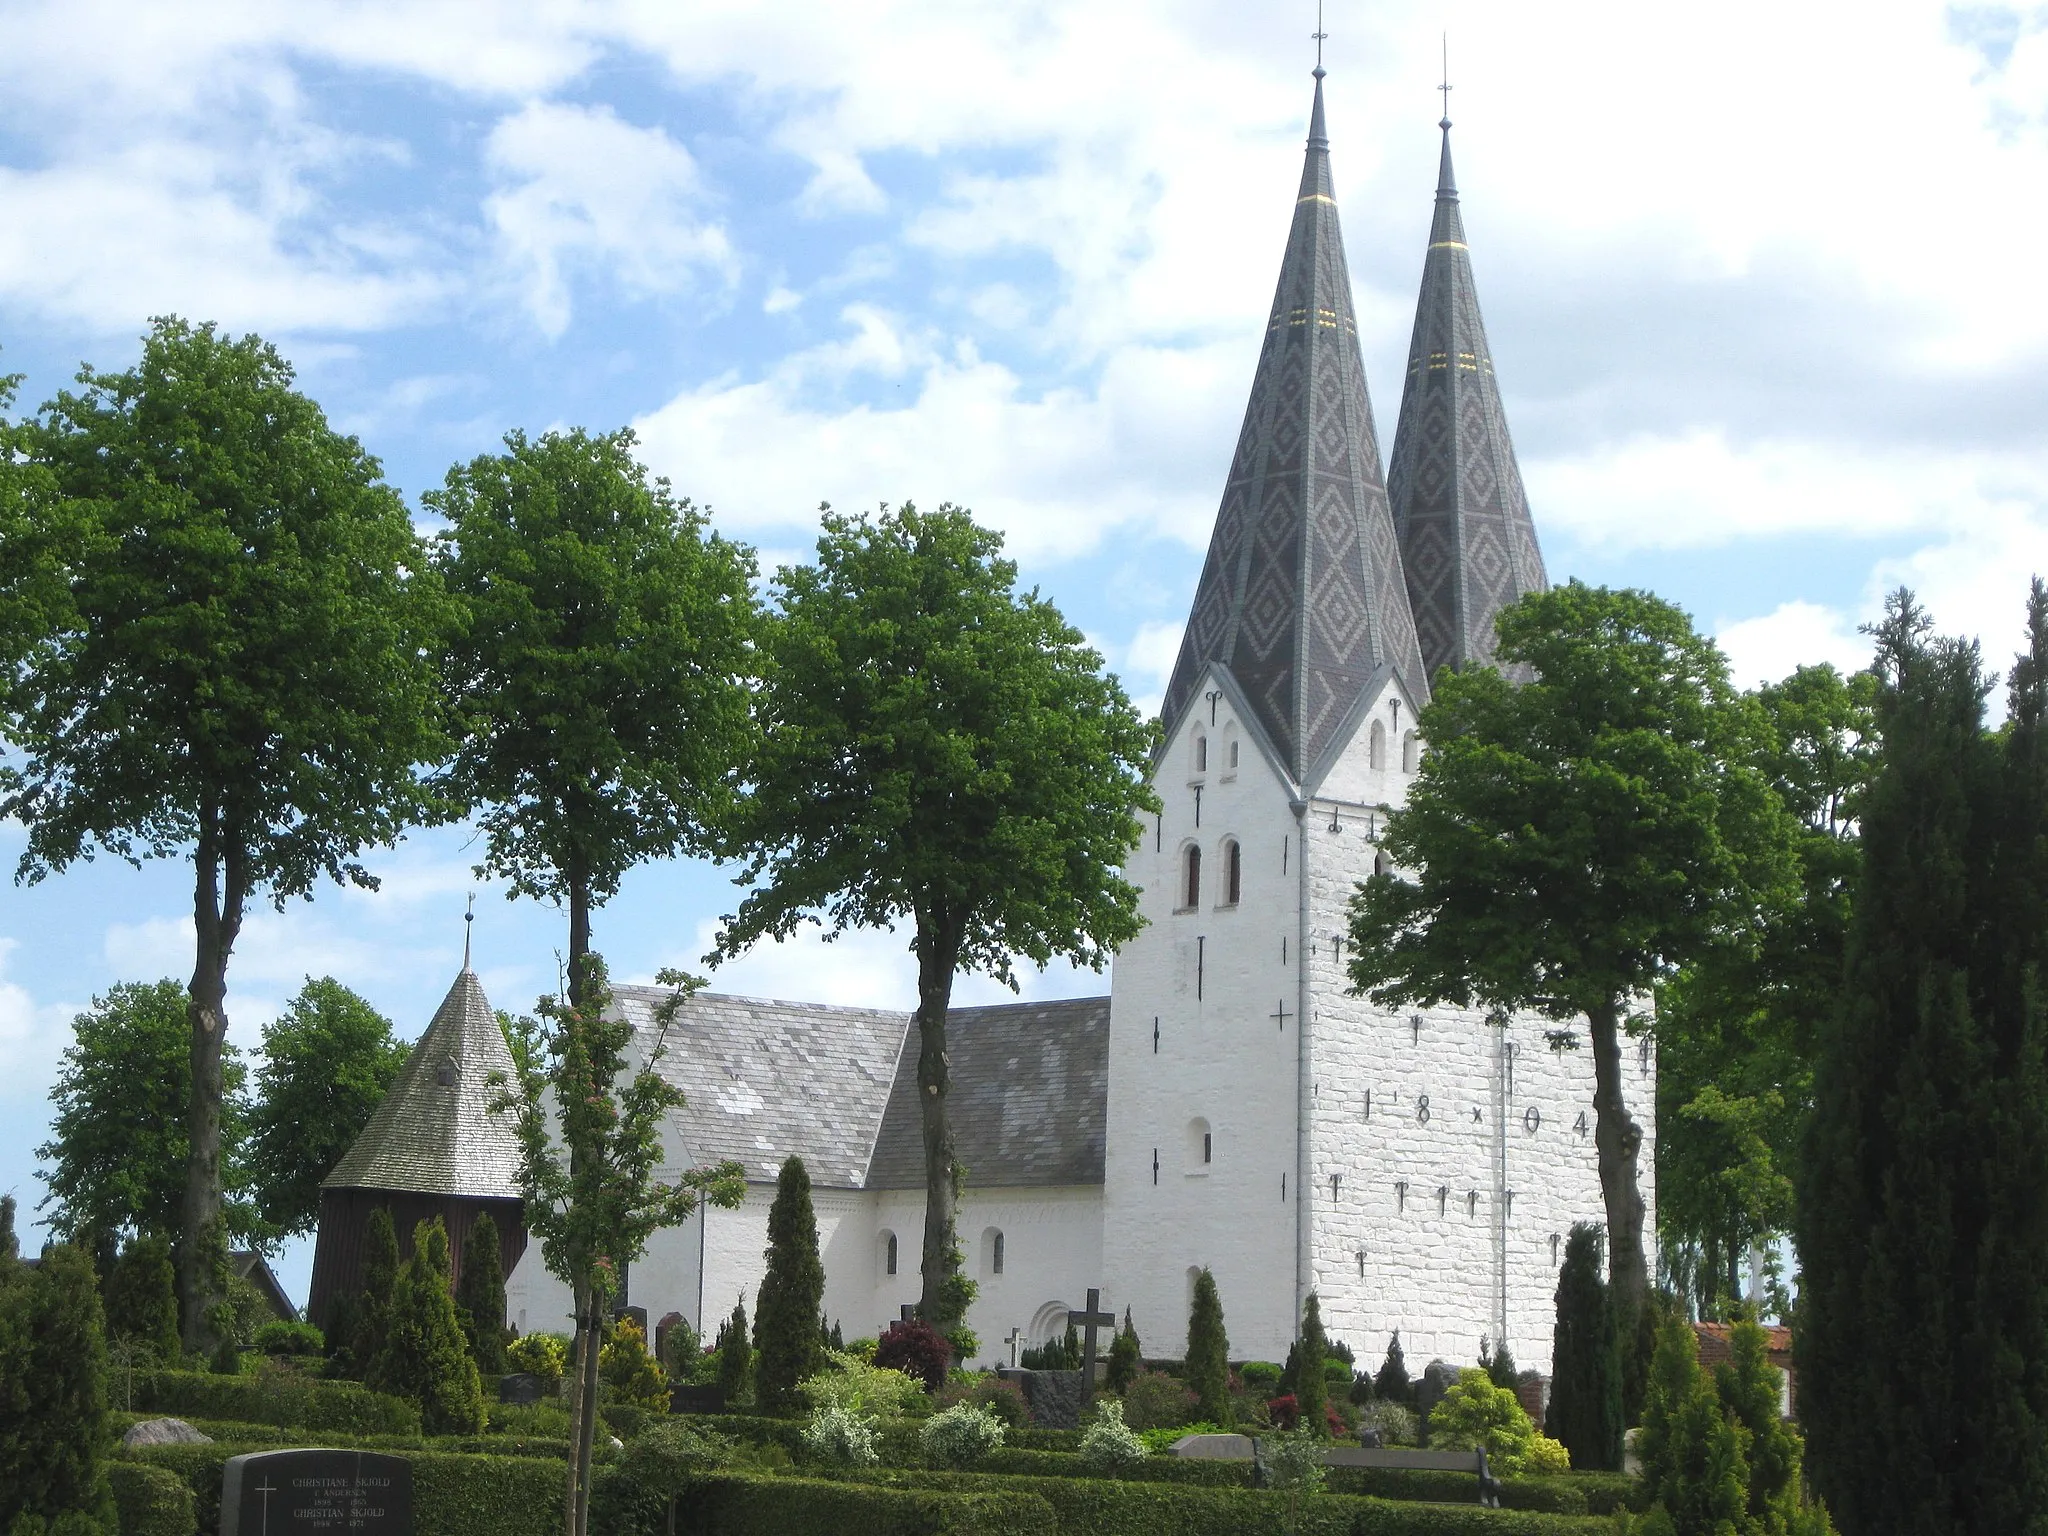 Photo showing: The church "Broager Kirke" in the small town "Broager". The town is located in Southern Jutland, Denmark.